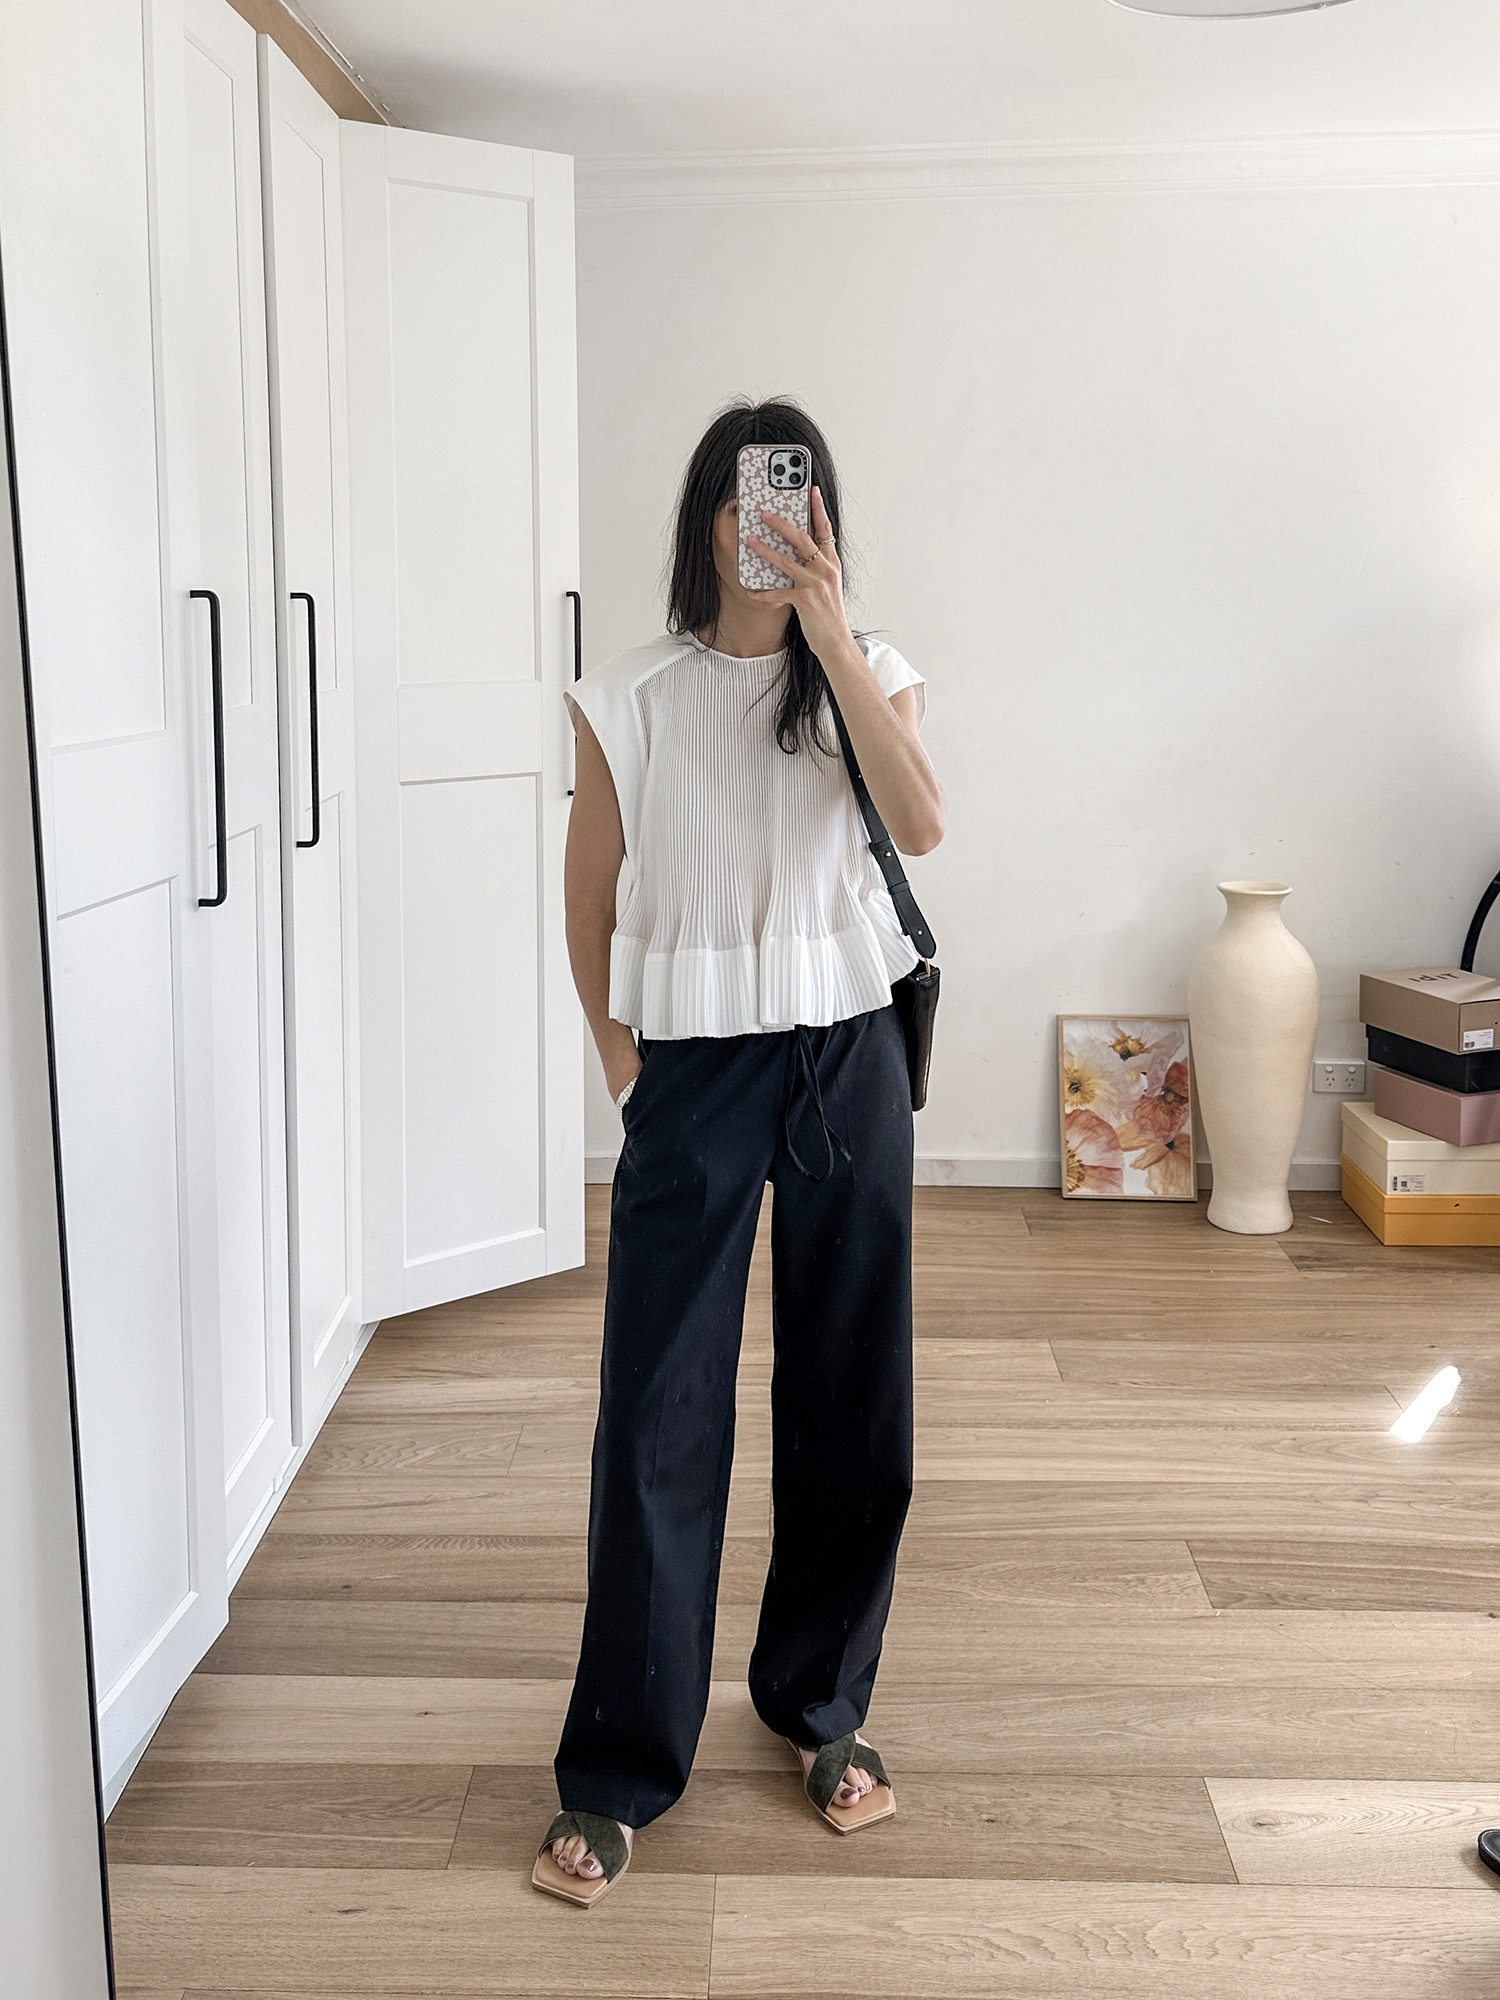 Tibi sleeveless pleated top with Arket wool trousers spring and summer style